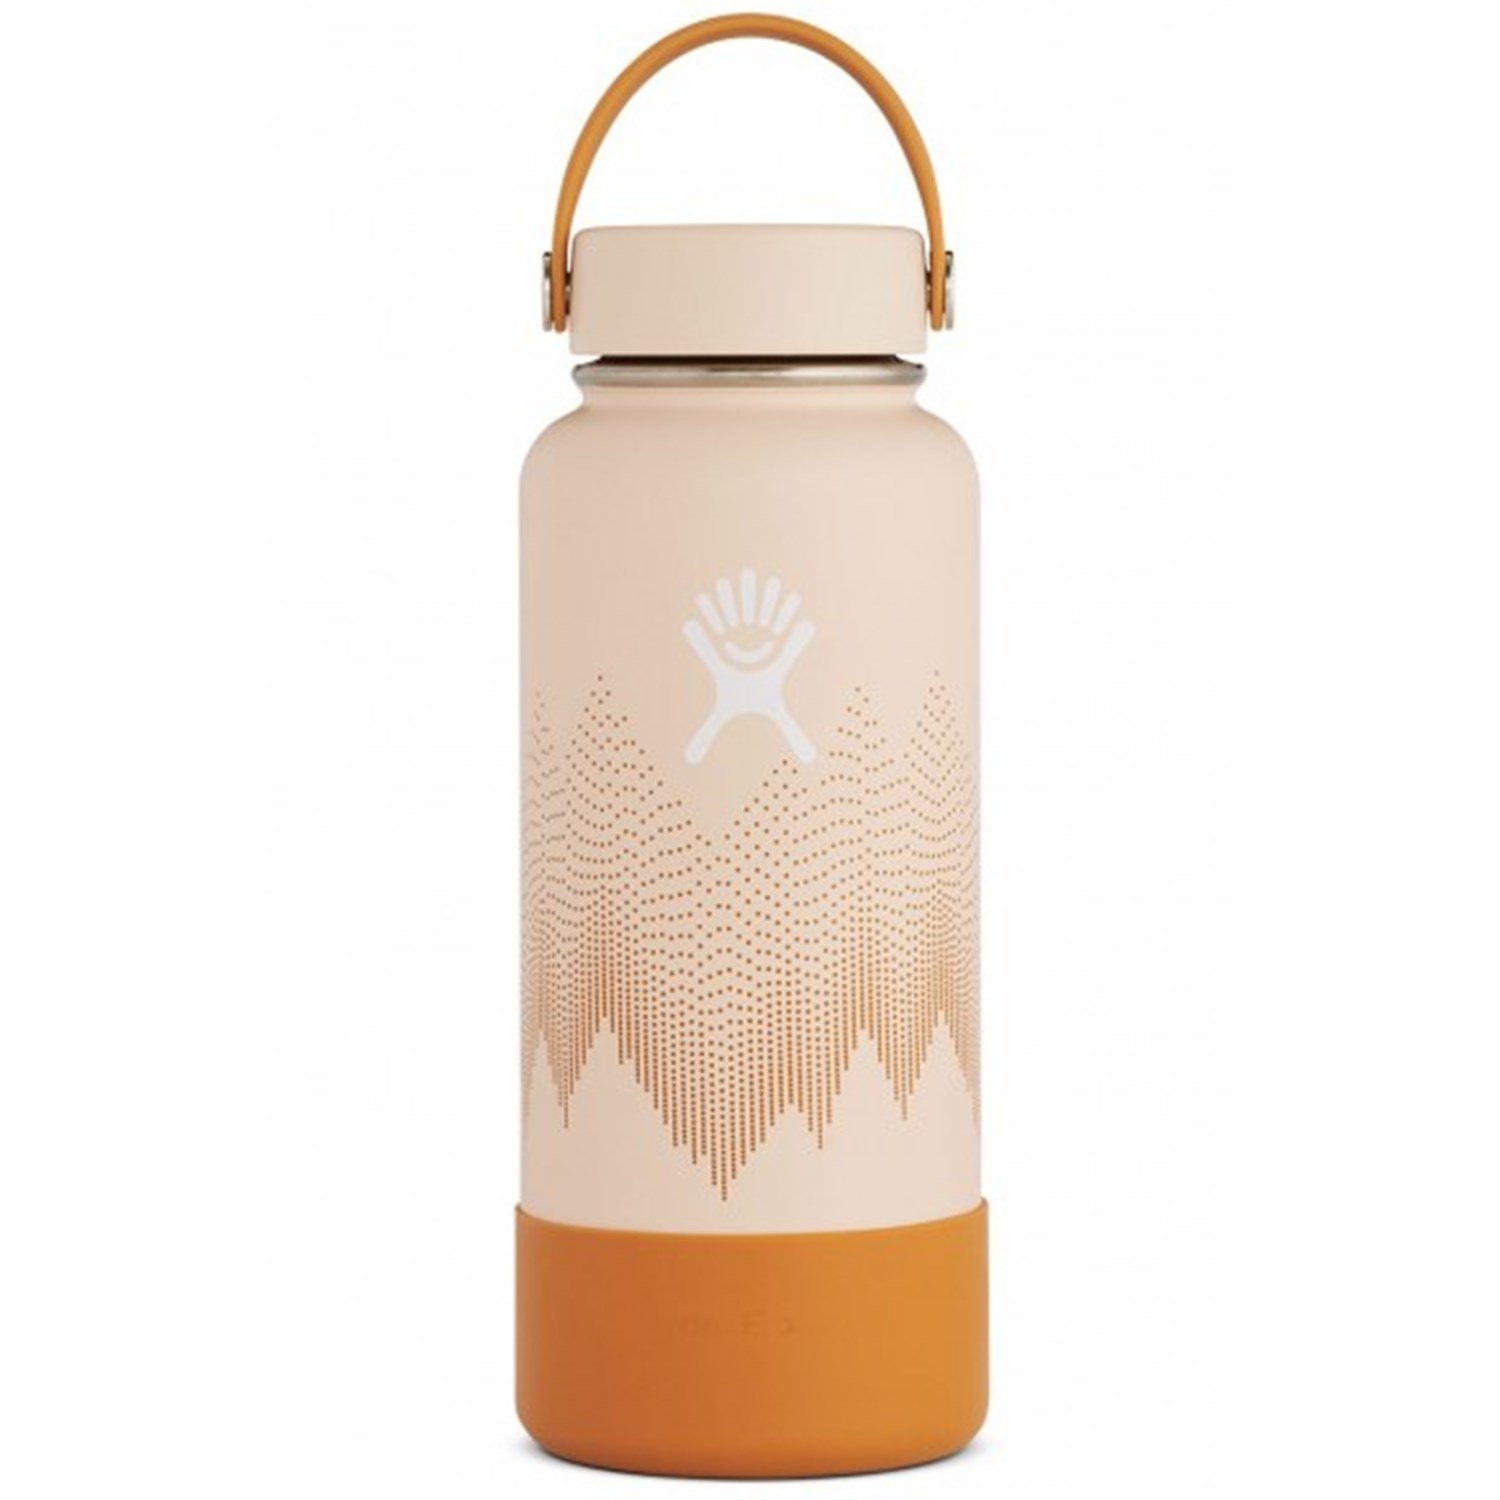 https://images.evo.com/imgp/zoom/166416/682109/hydro-flask-wonder-limited-edition-32oz-wide-mouth-water-bottle-.jpg